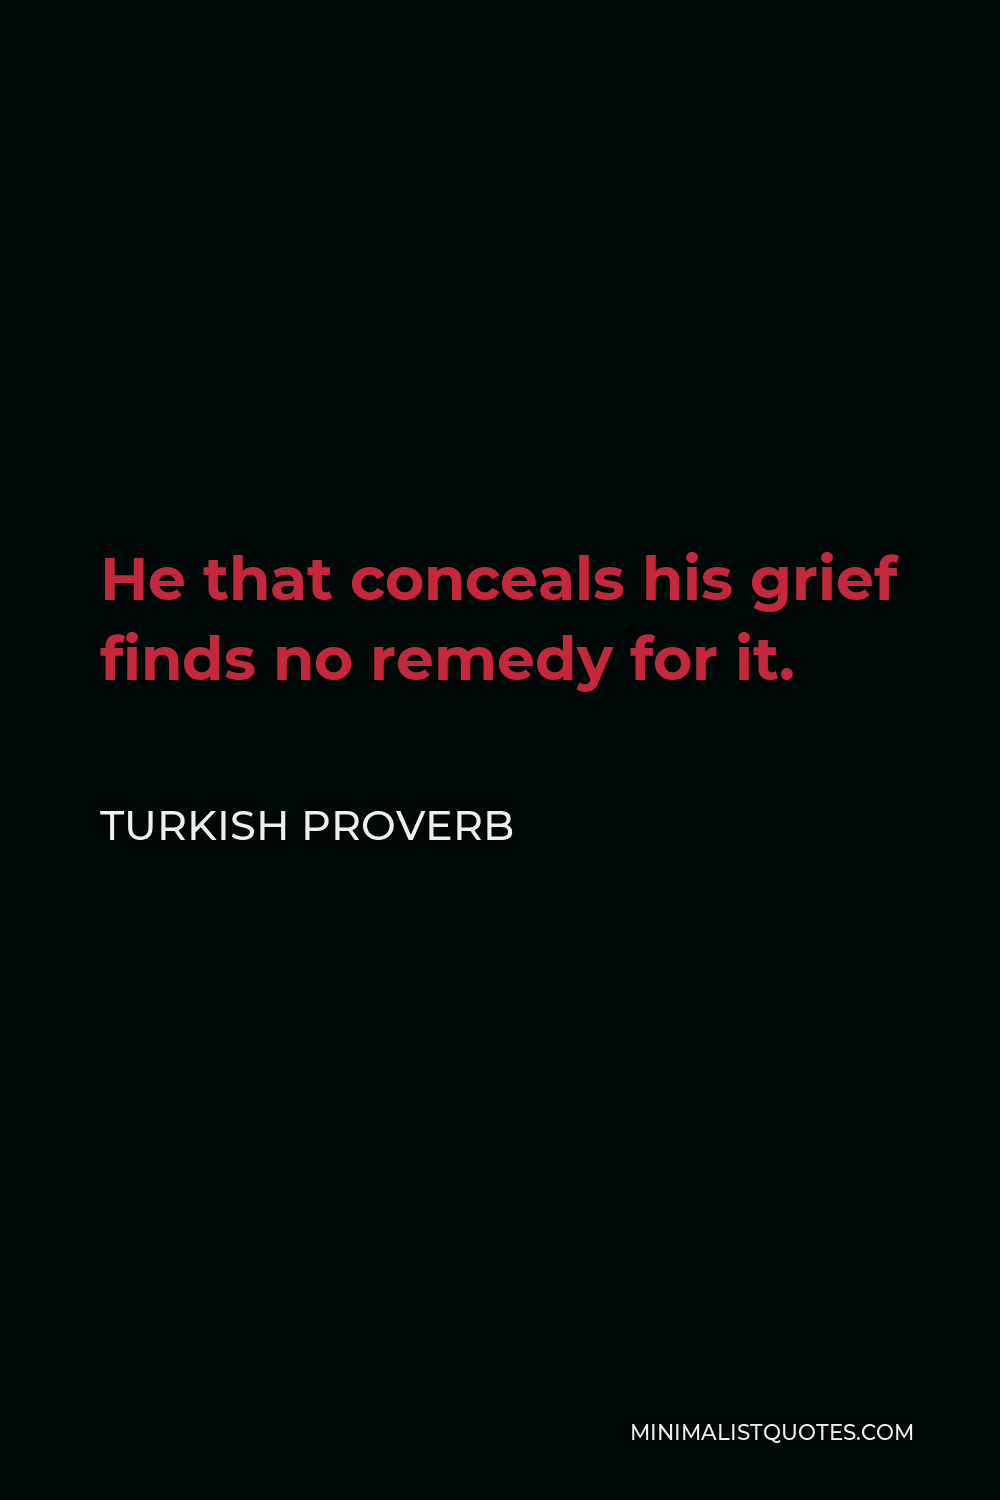 Turkish Proverb Quote - He that conceals his grief finds no remedy for it.